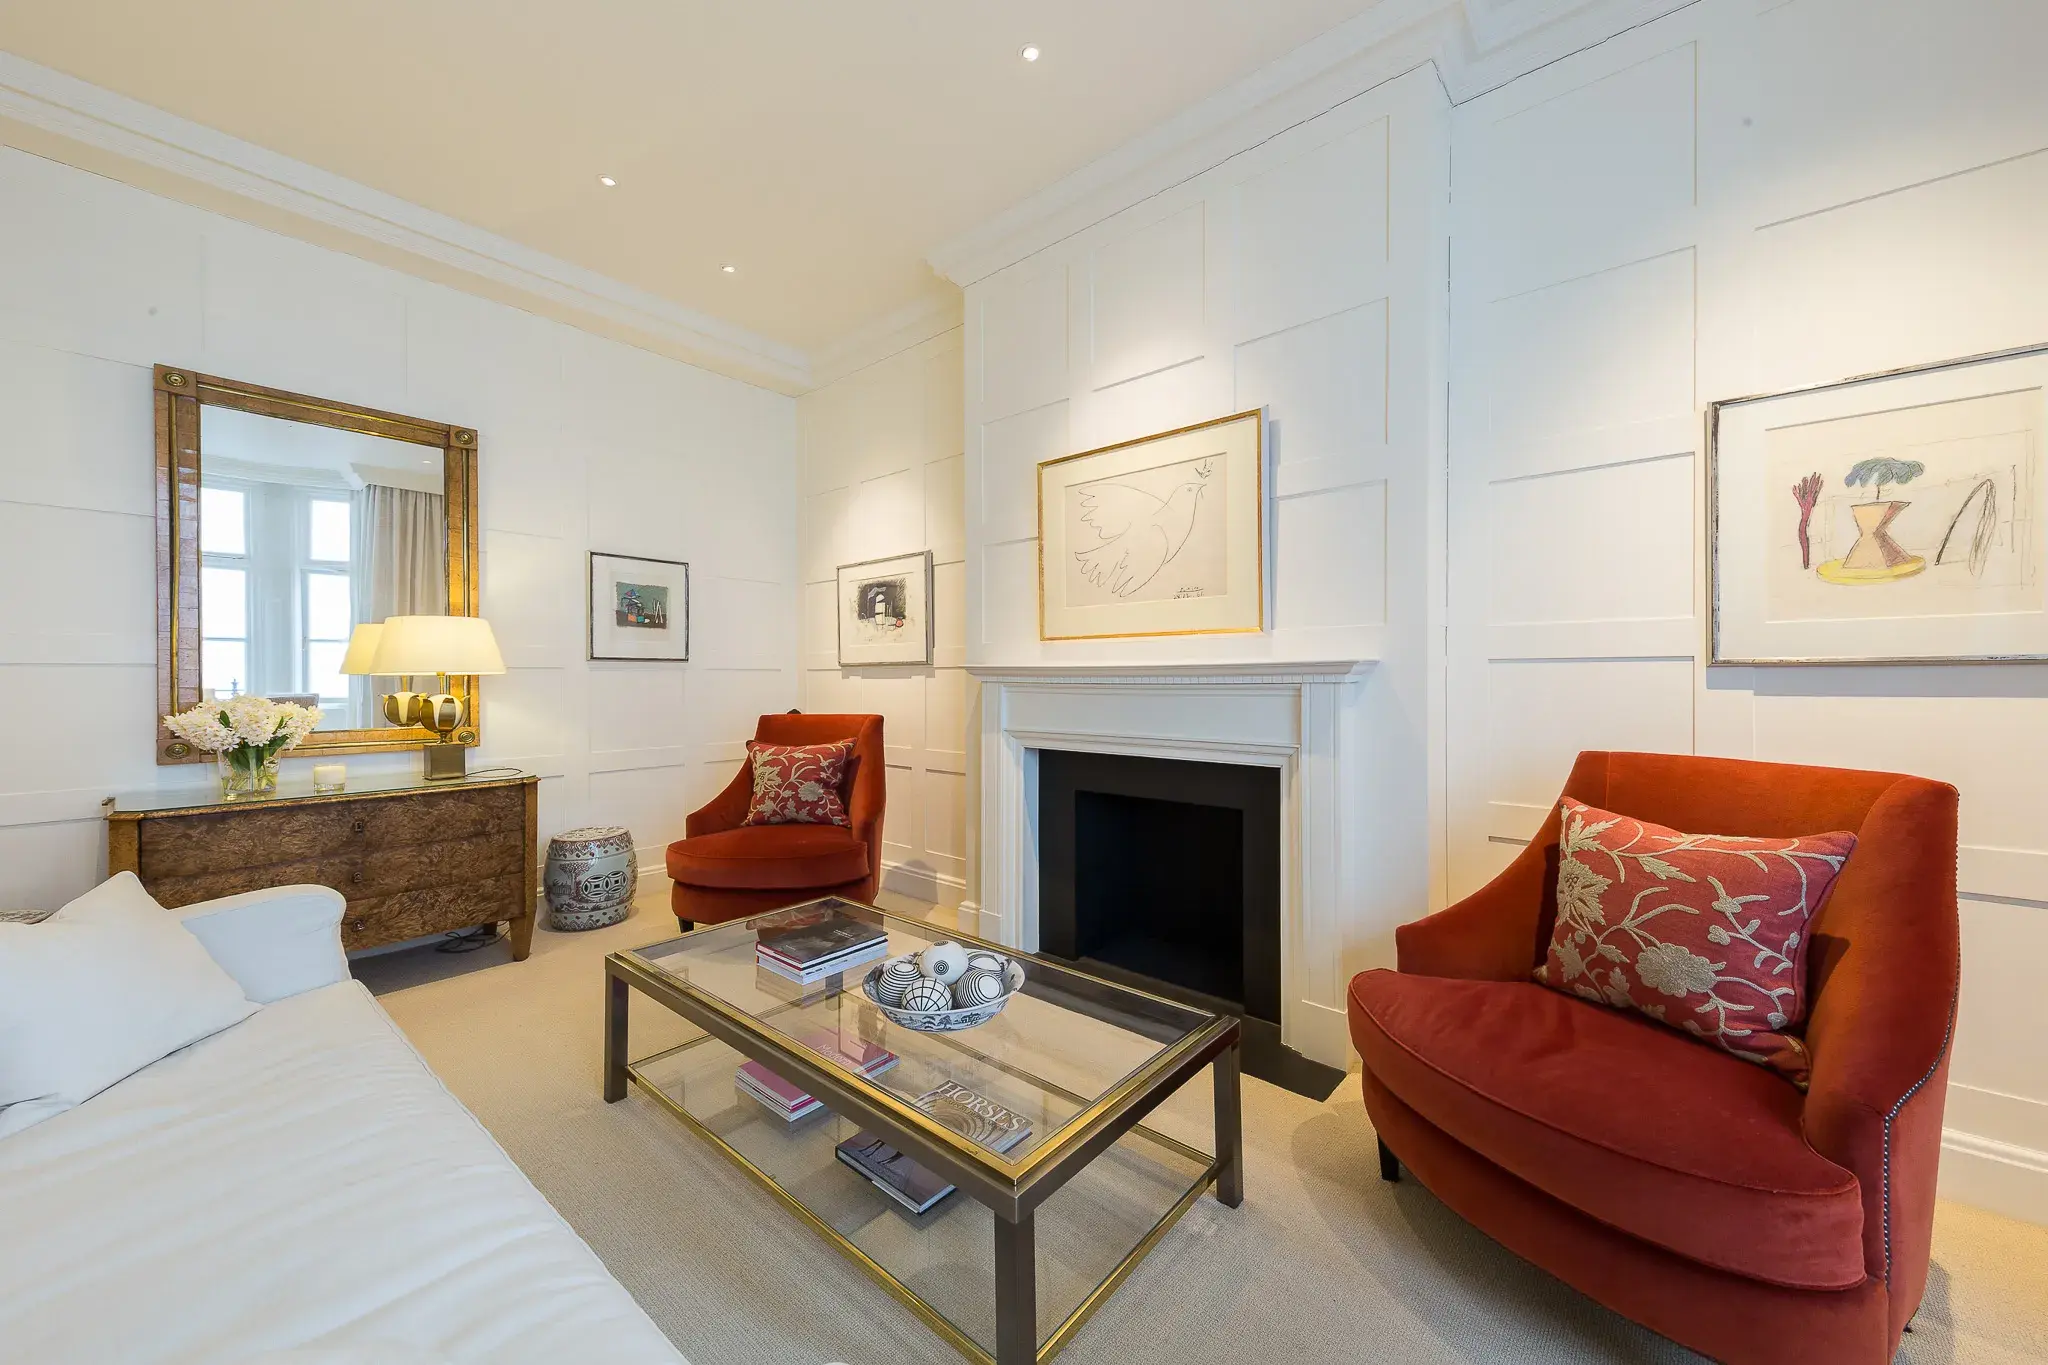 St James', holiday home in Marylebone, London